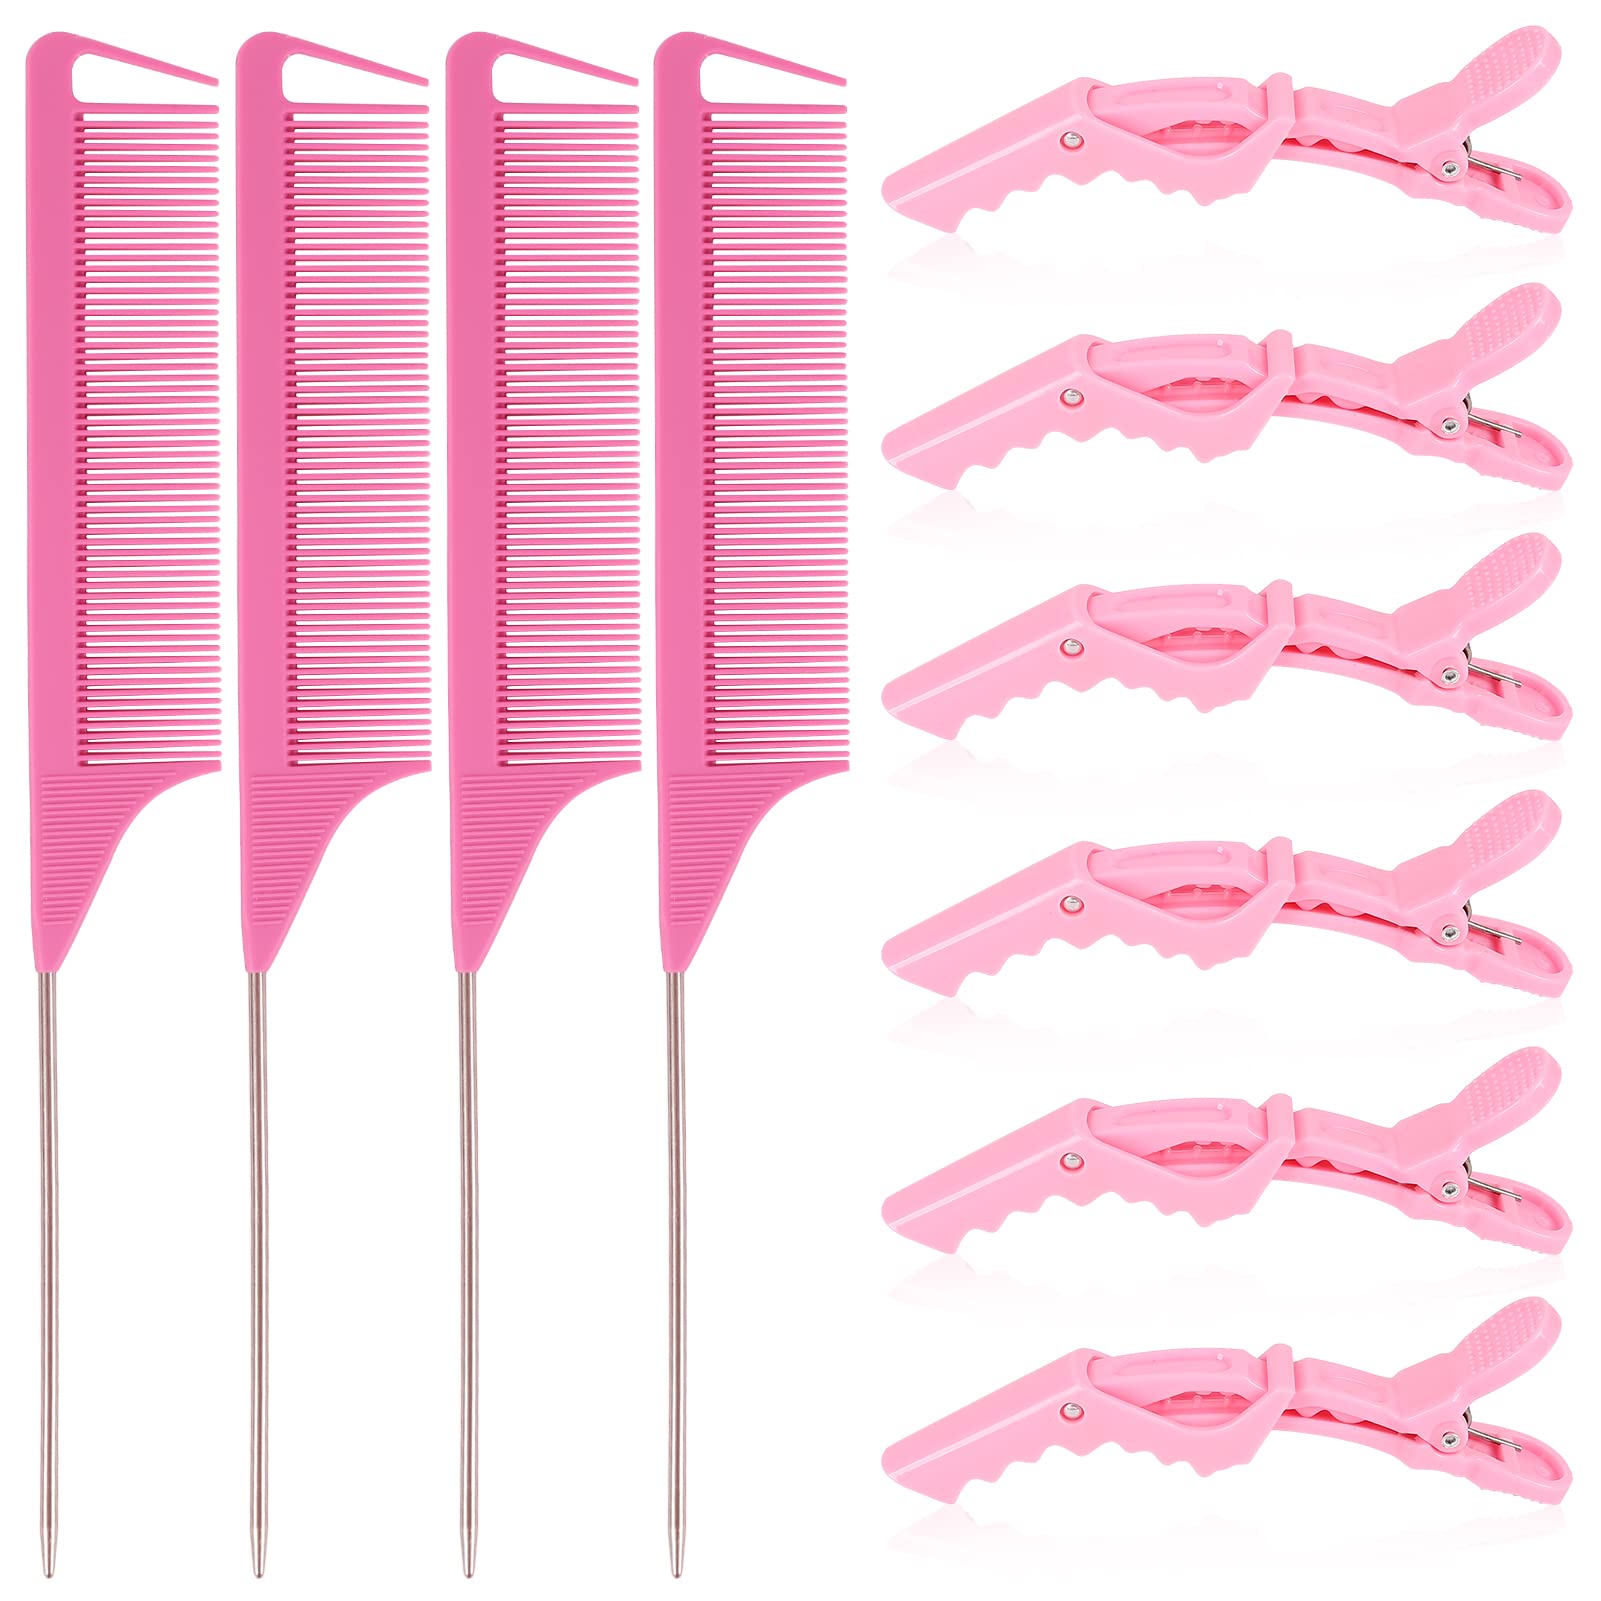 10Pcs Rat Tail Combs Set 4Pcs Hair Parting Comb and 6Pcs Alligator Styling  Sectioning Clips Carbon